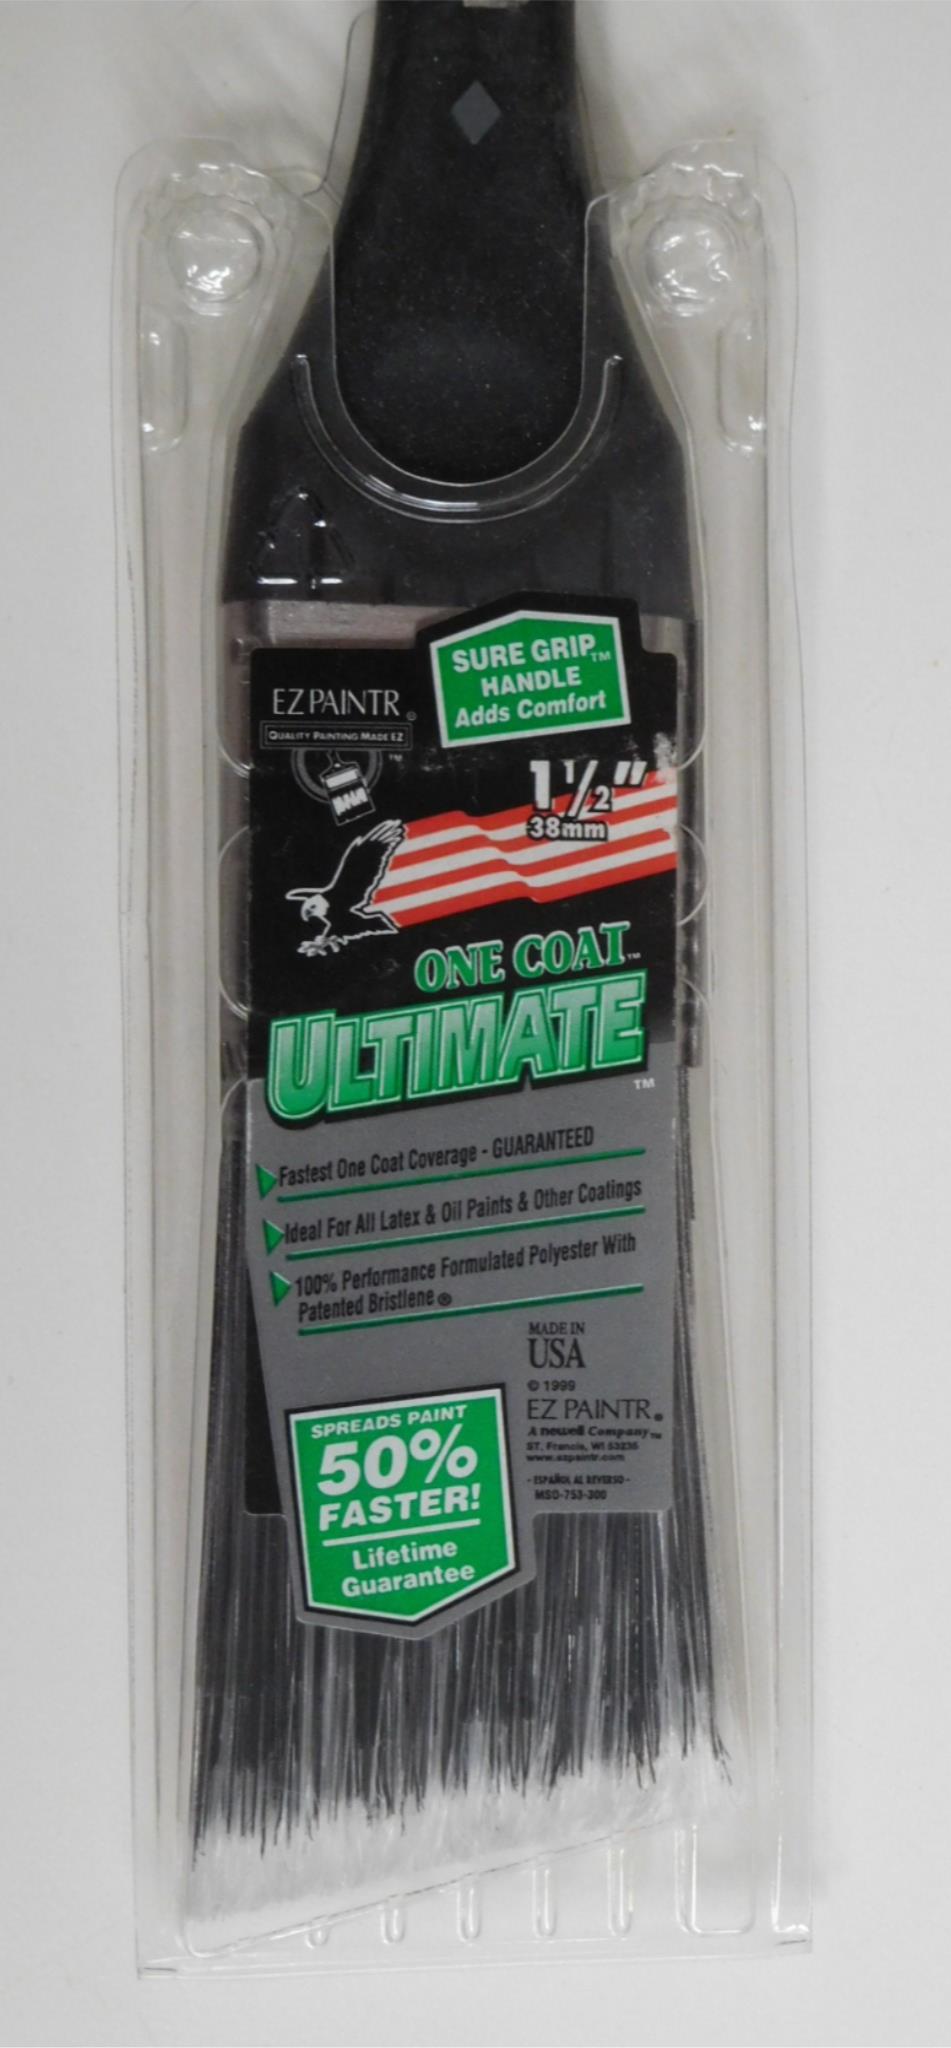 One Coat Ultimate MSO-653-304 Latex, Oil and Other 1-1/2" Angle Paintbrush 3 PCS